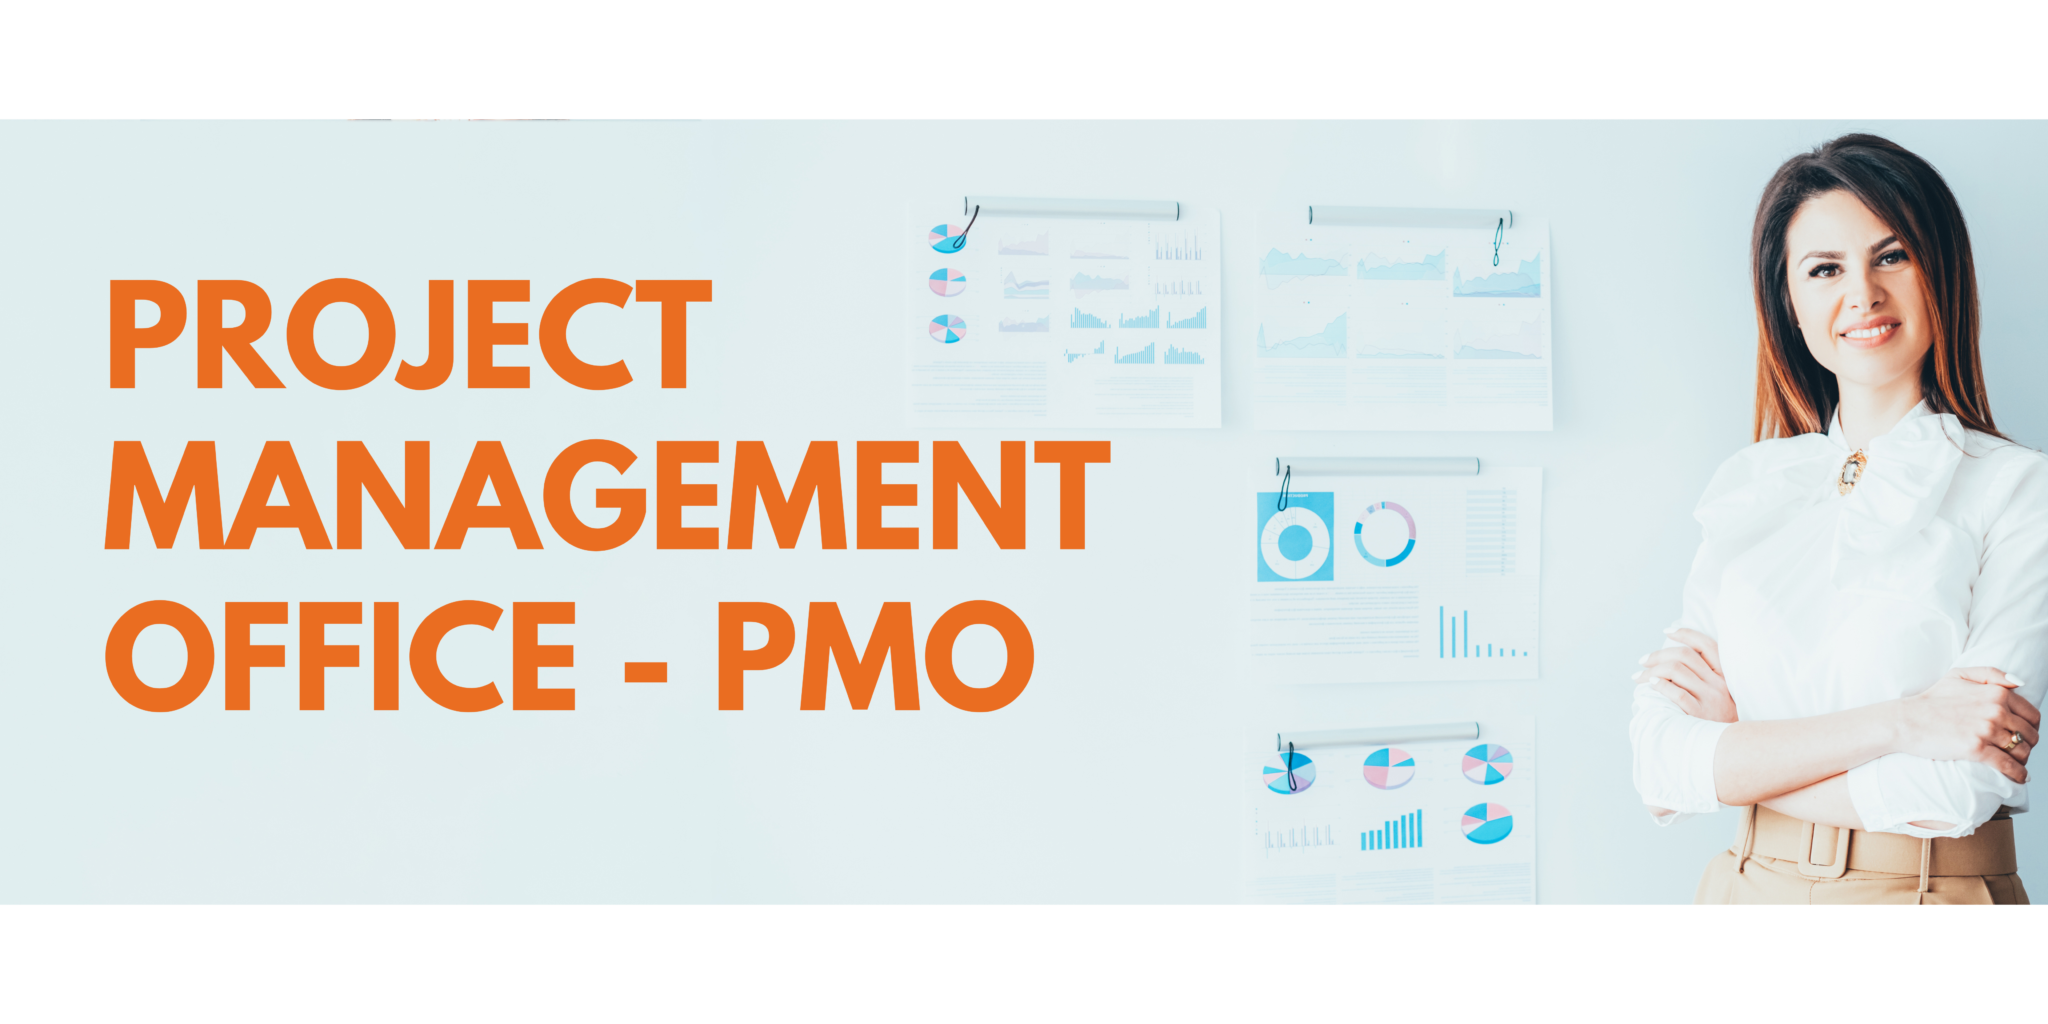 can a pmo accelerate the implementation process